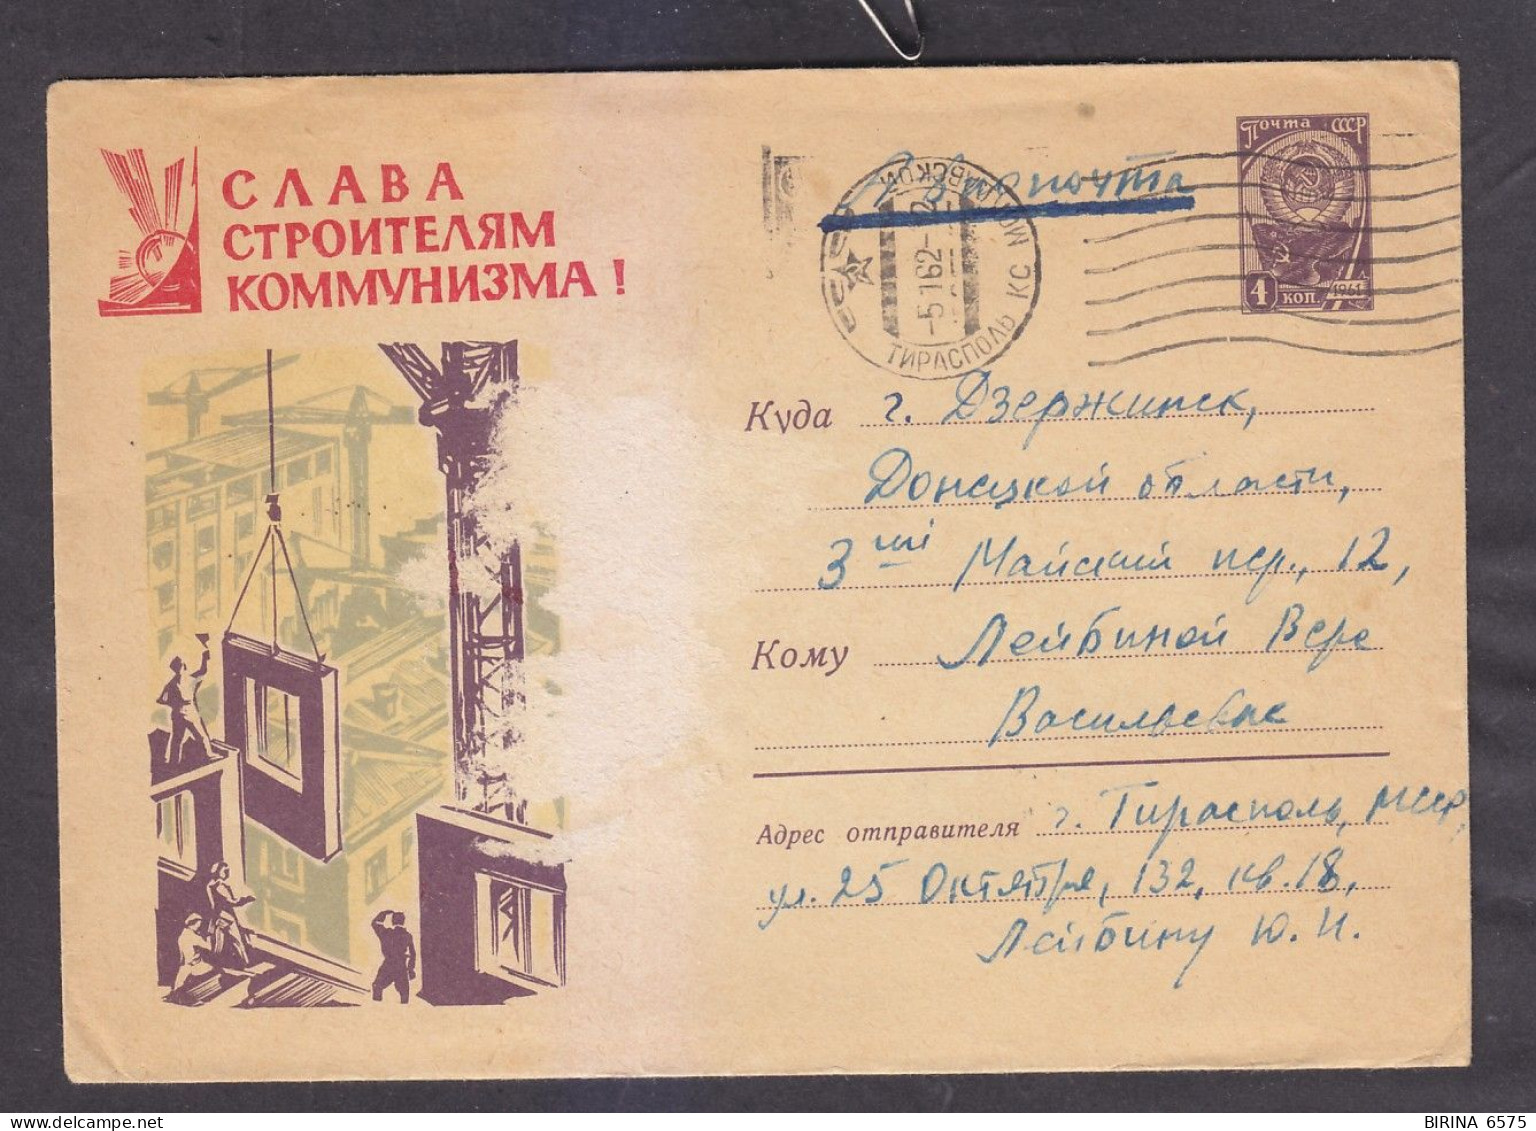 Envelope. The USSR. GLORY TO THE BUILDERS OF COMMUNISM!. Mail. 1962. - 8-44 - Storia Postale